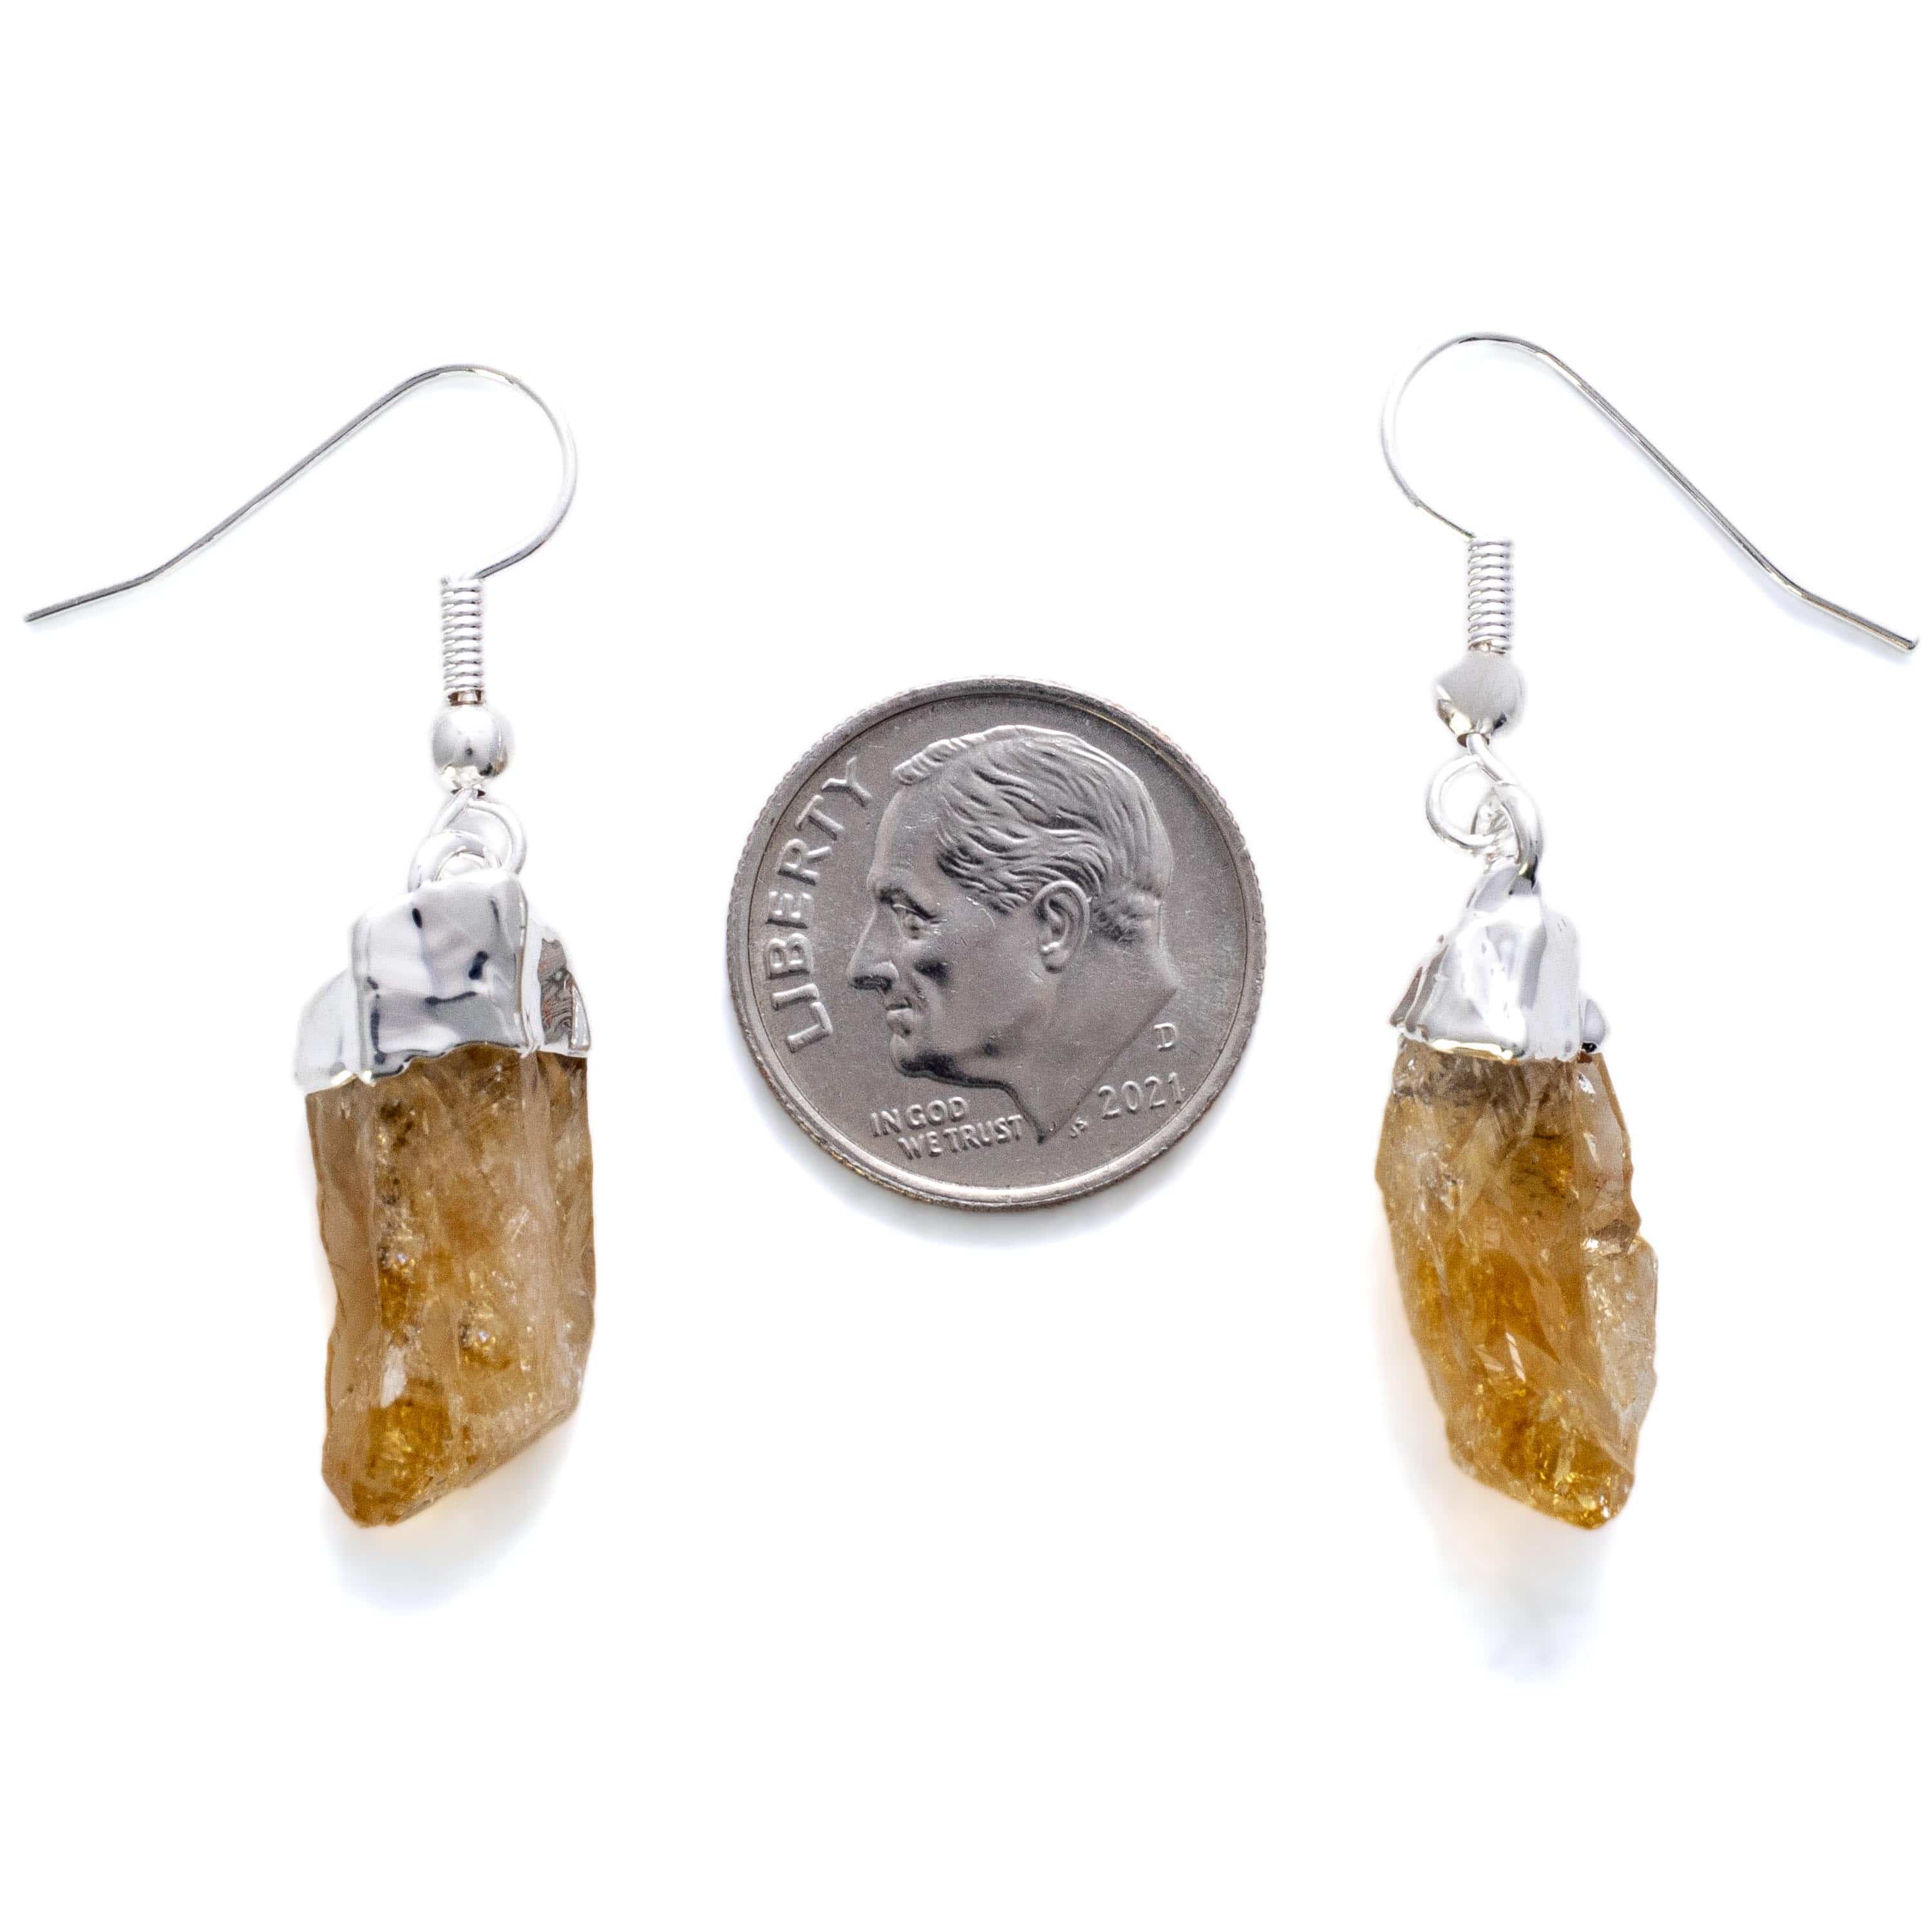 Kalifano Crystal Jewelry Citrine Crystal Point Earrng CJE-1501-CT